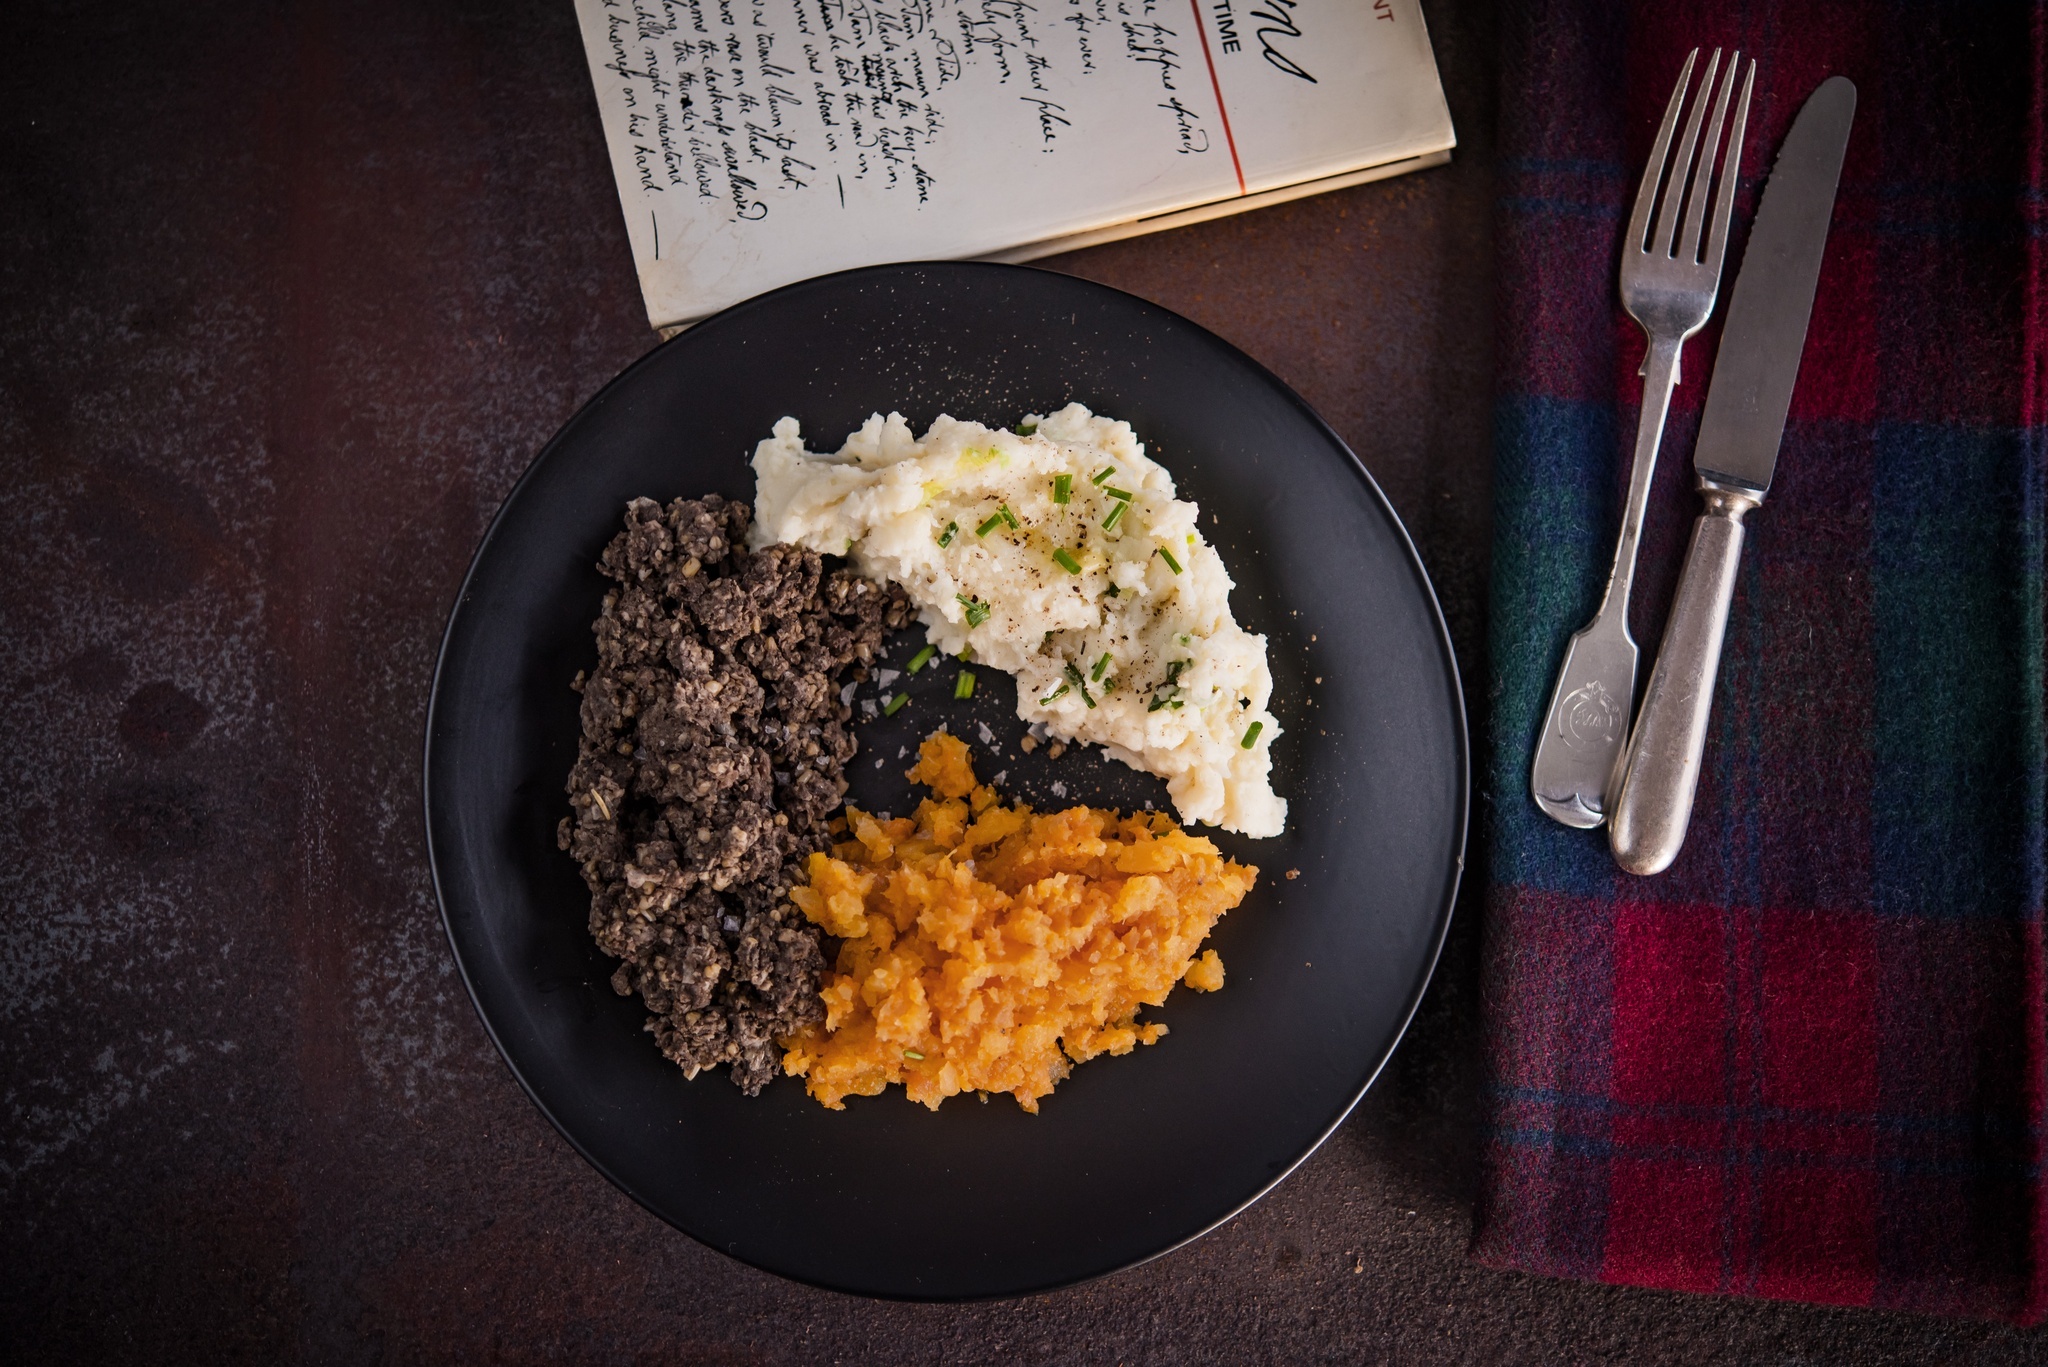 Burns Supper traditionally consists of haggis, neeps and tatties.